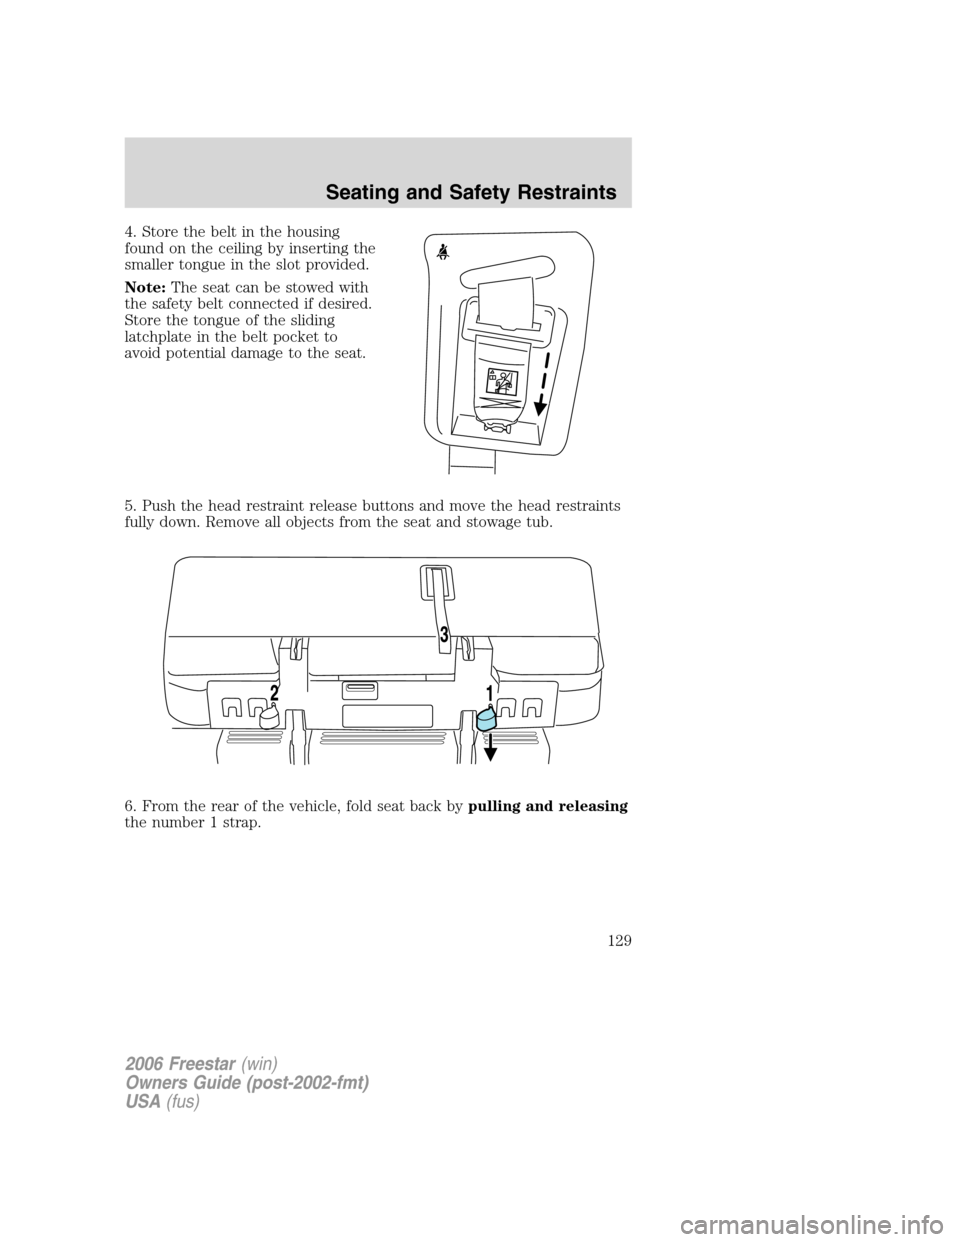 FORD FREESTAR 2006 1.G Owners Manual 4. Store the belt in the housing
found on the ceiling by inserting the
smaller tongue in the slot provided.
Note:The seat can be stowed with
the safety belt connected if desired.
Store the tongue of t